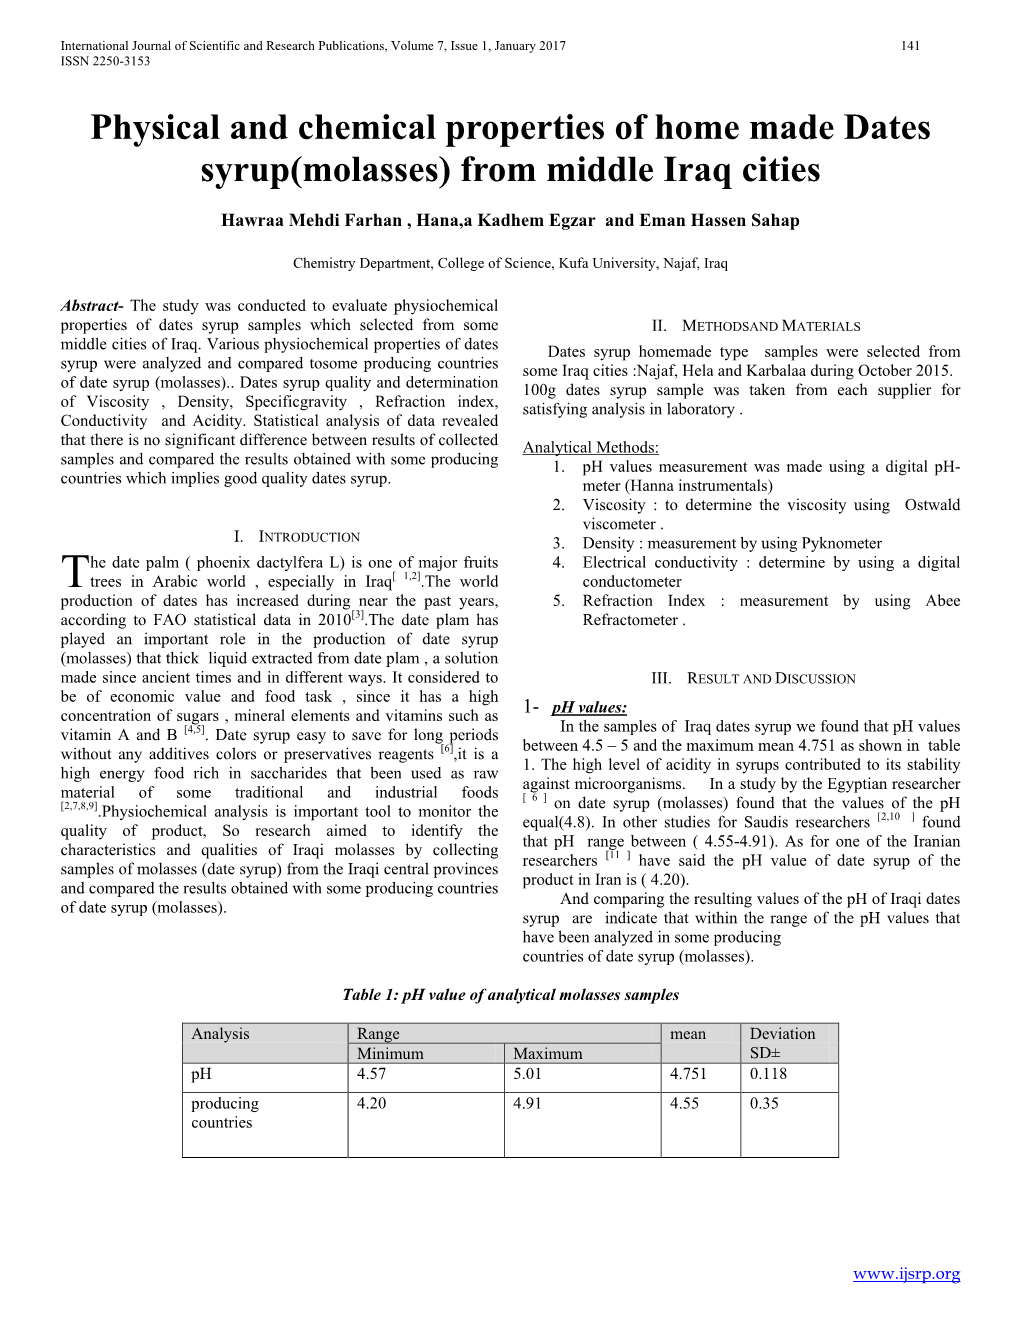 Physical and Chemical Properties of Home Made Dates Syrup(Molasses) from Middle Iraq Cities